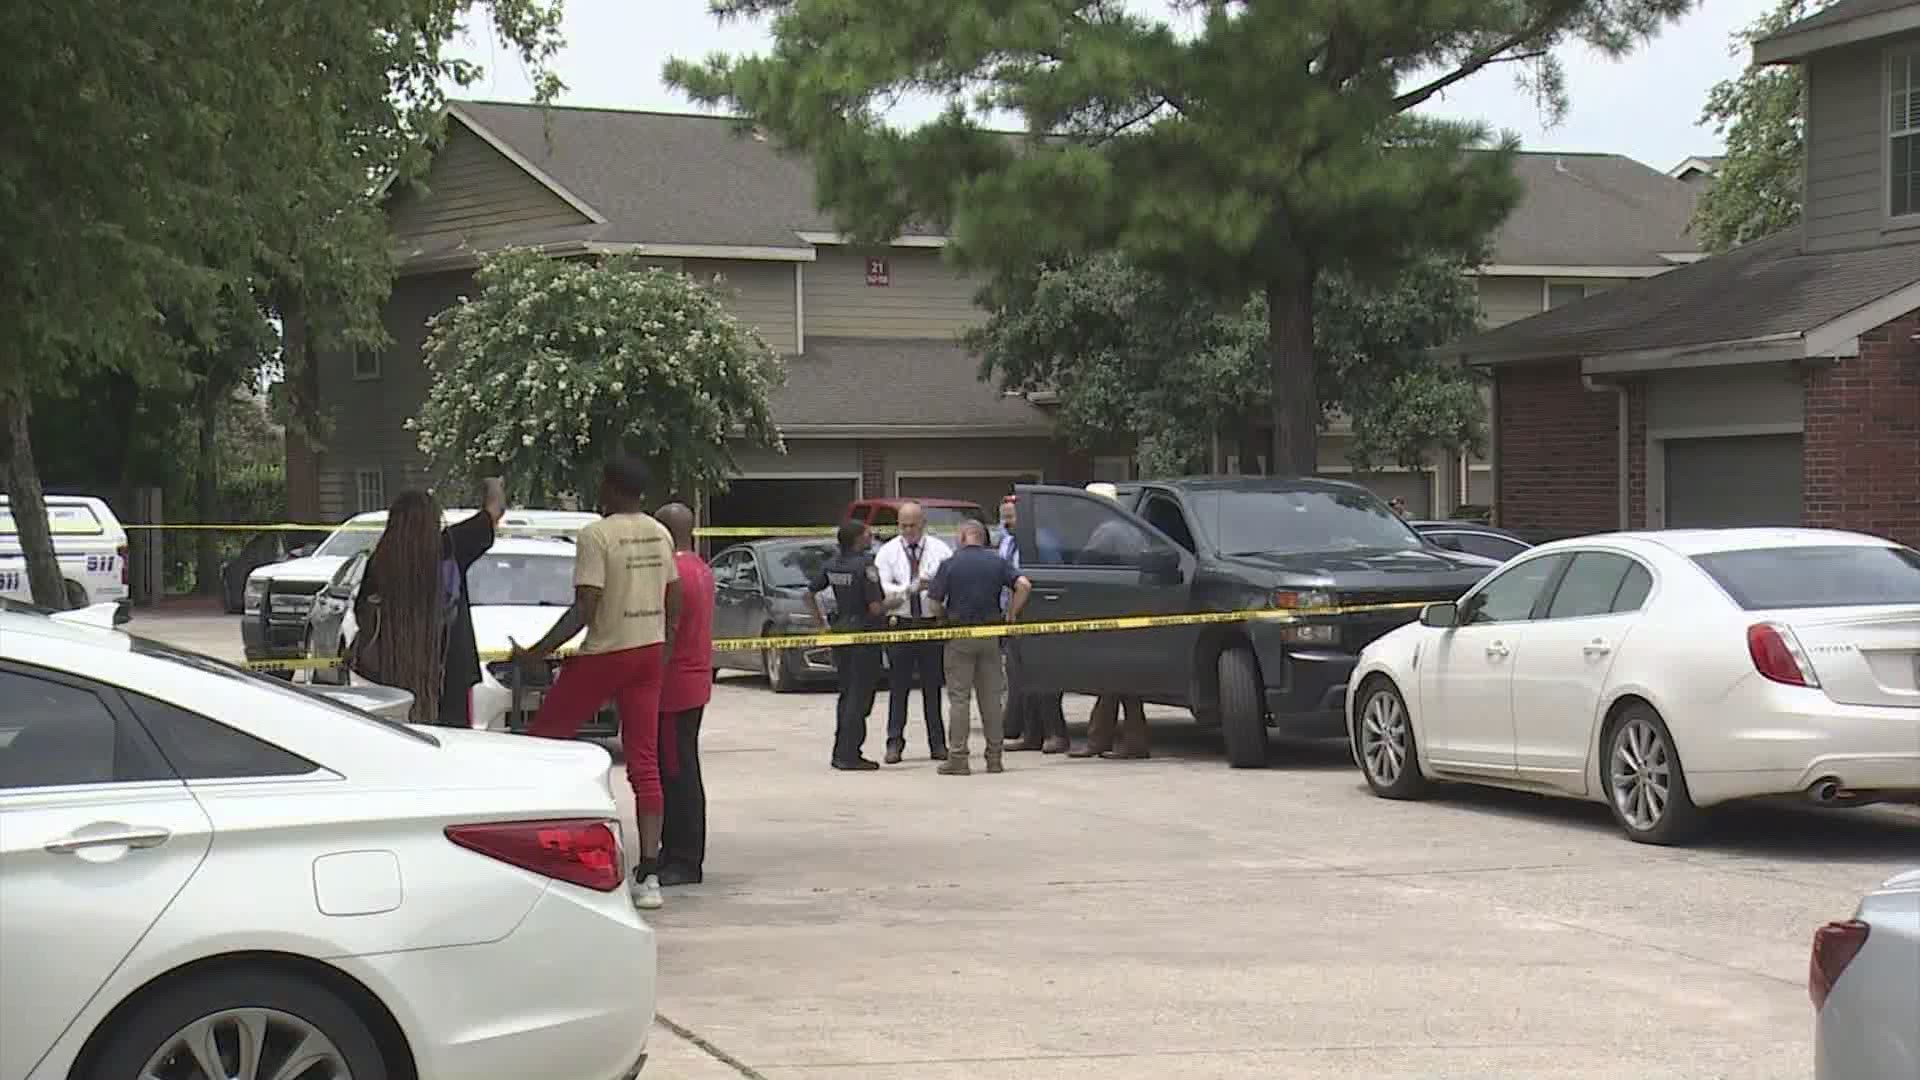 Harris County Sheriff deputies said they are investigating a "horrific crime scene" inside of an apartment where a mother was found dead.